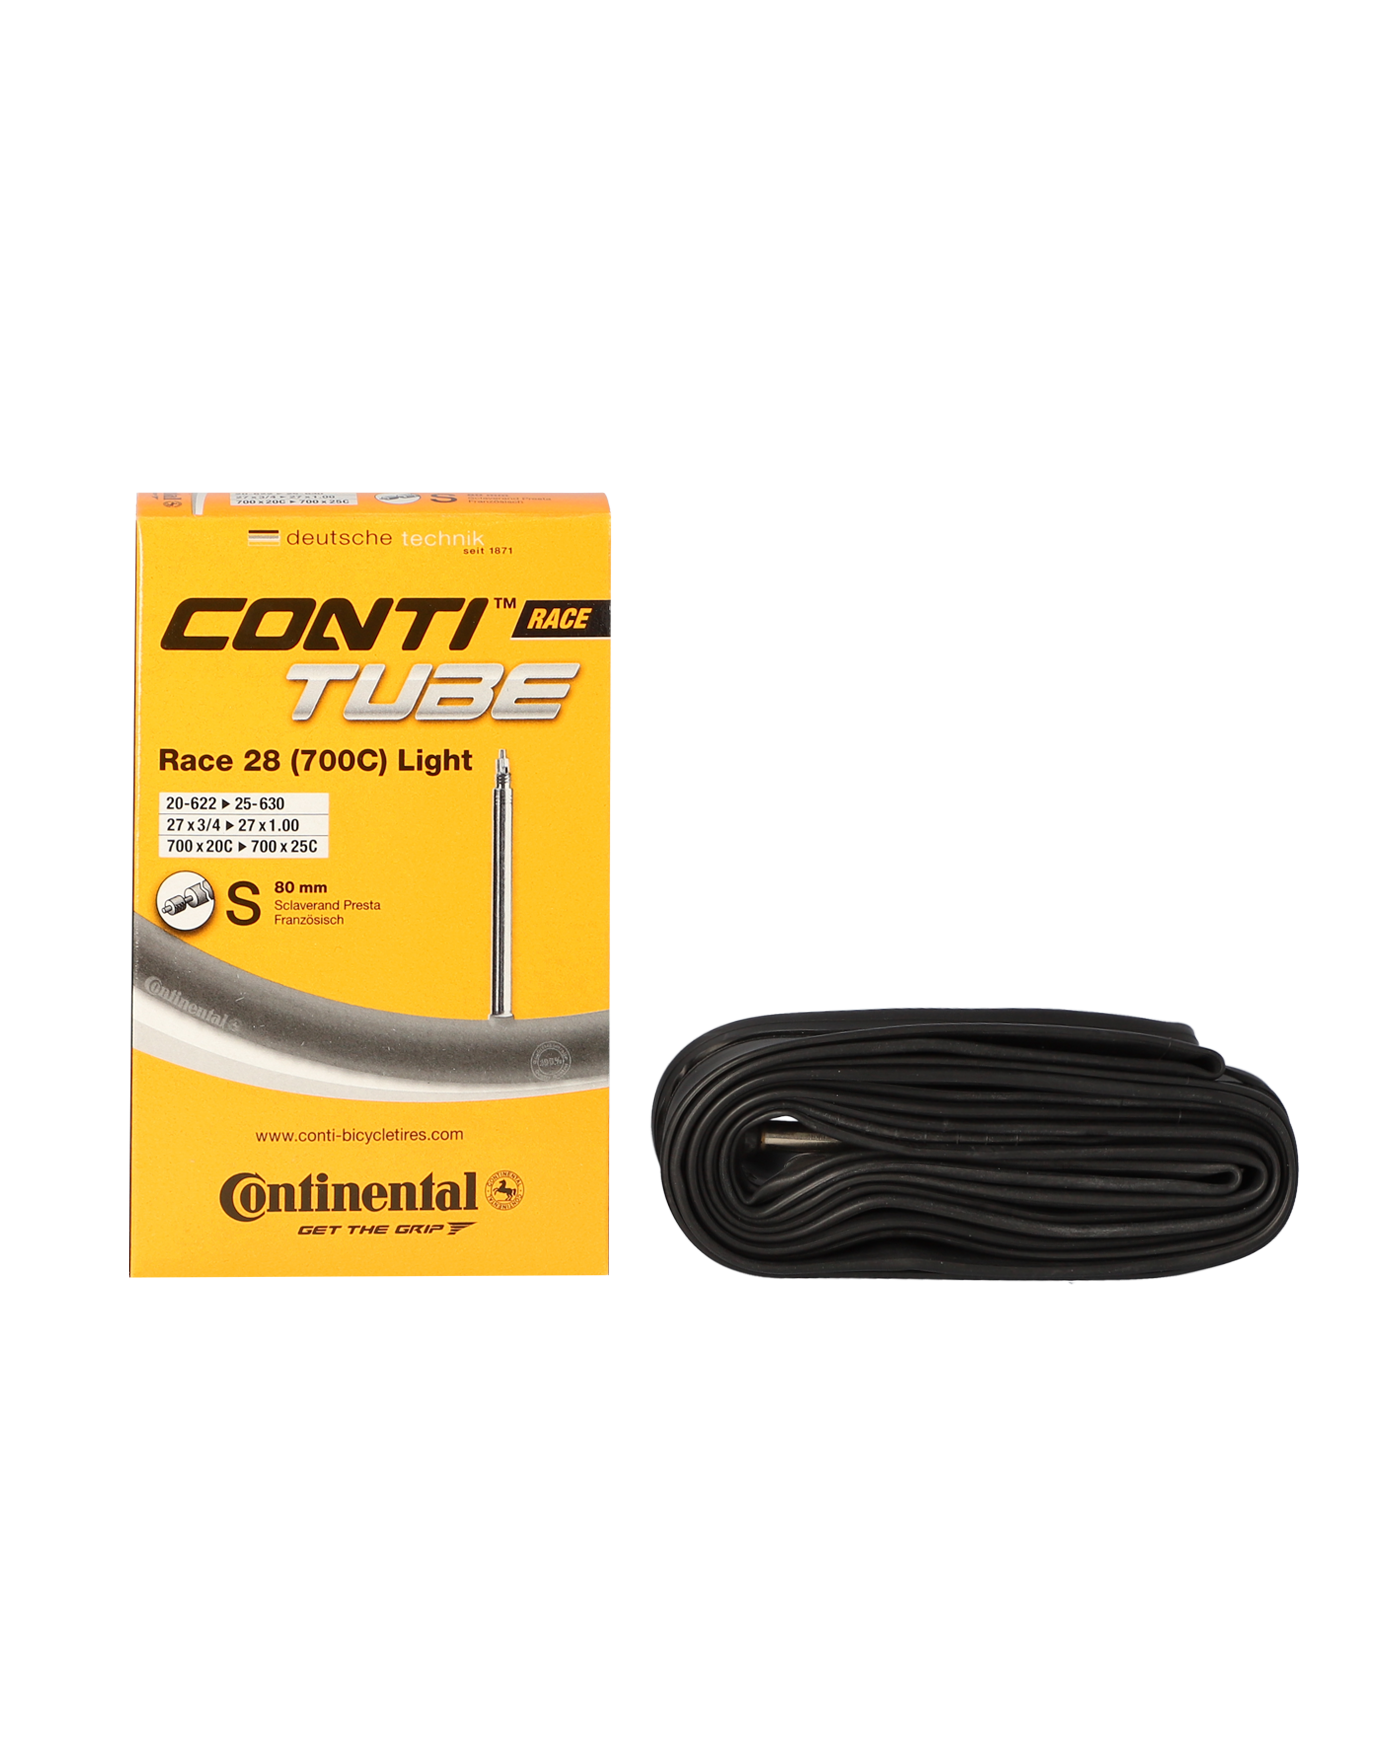 5 X Continental Race 28 700c Inner Tubes 80mm Presta Valve for Road Racing R28 for sale online 